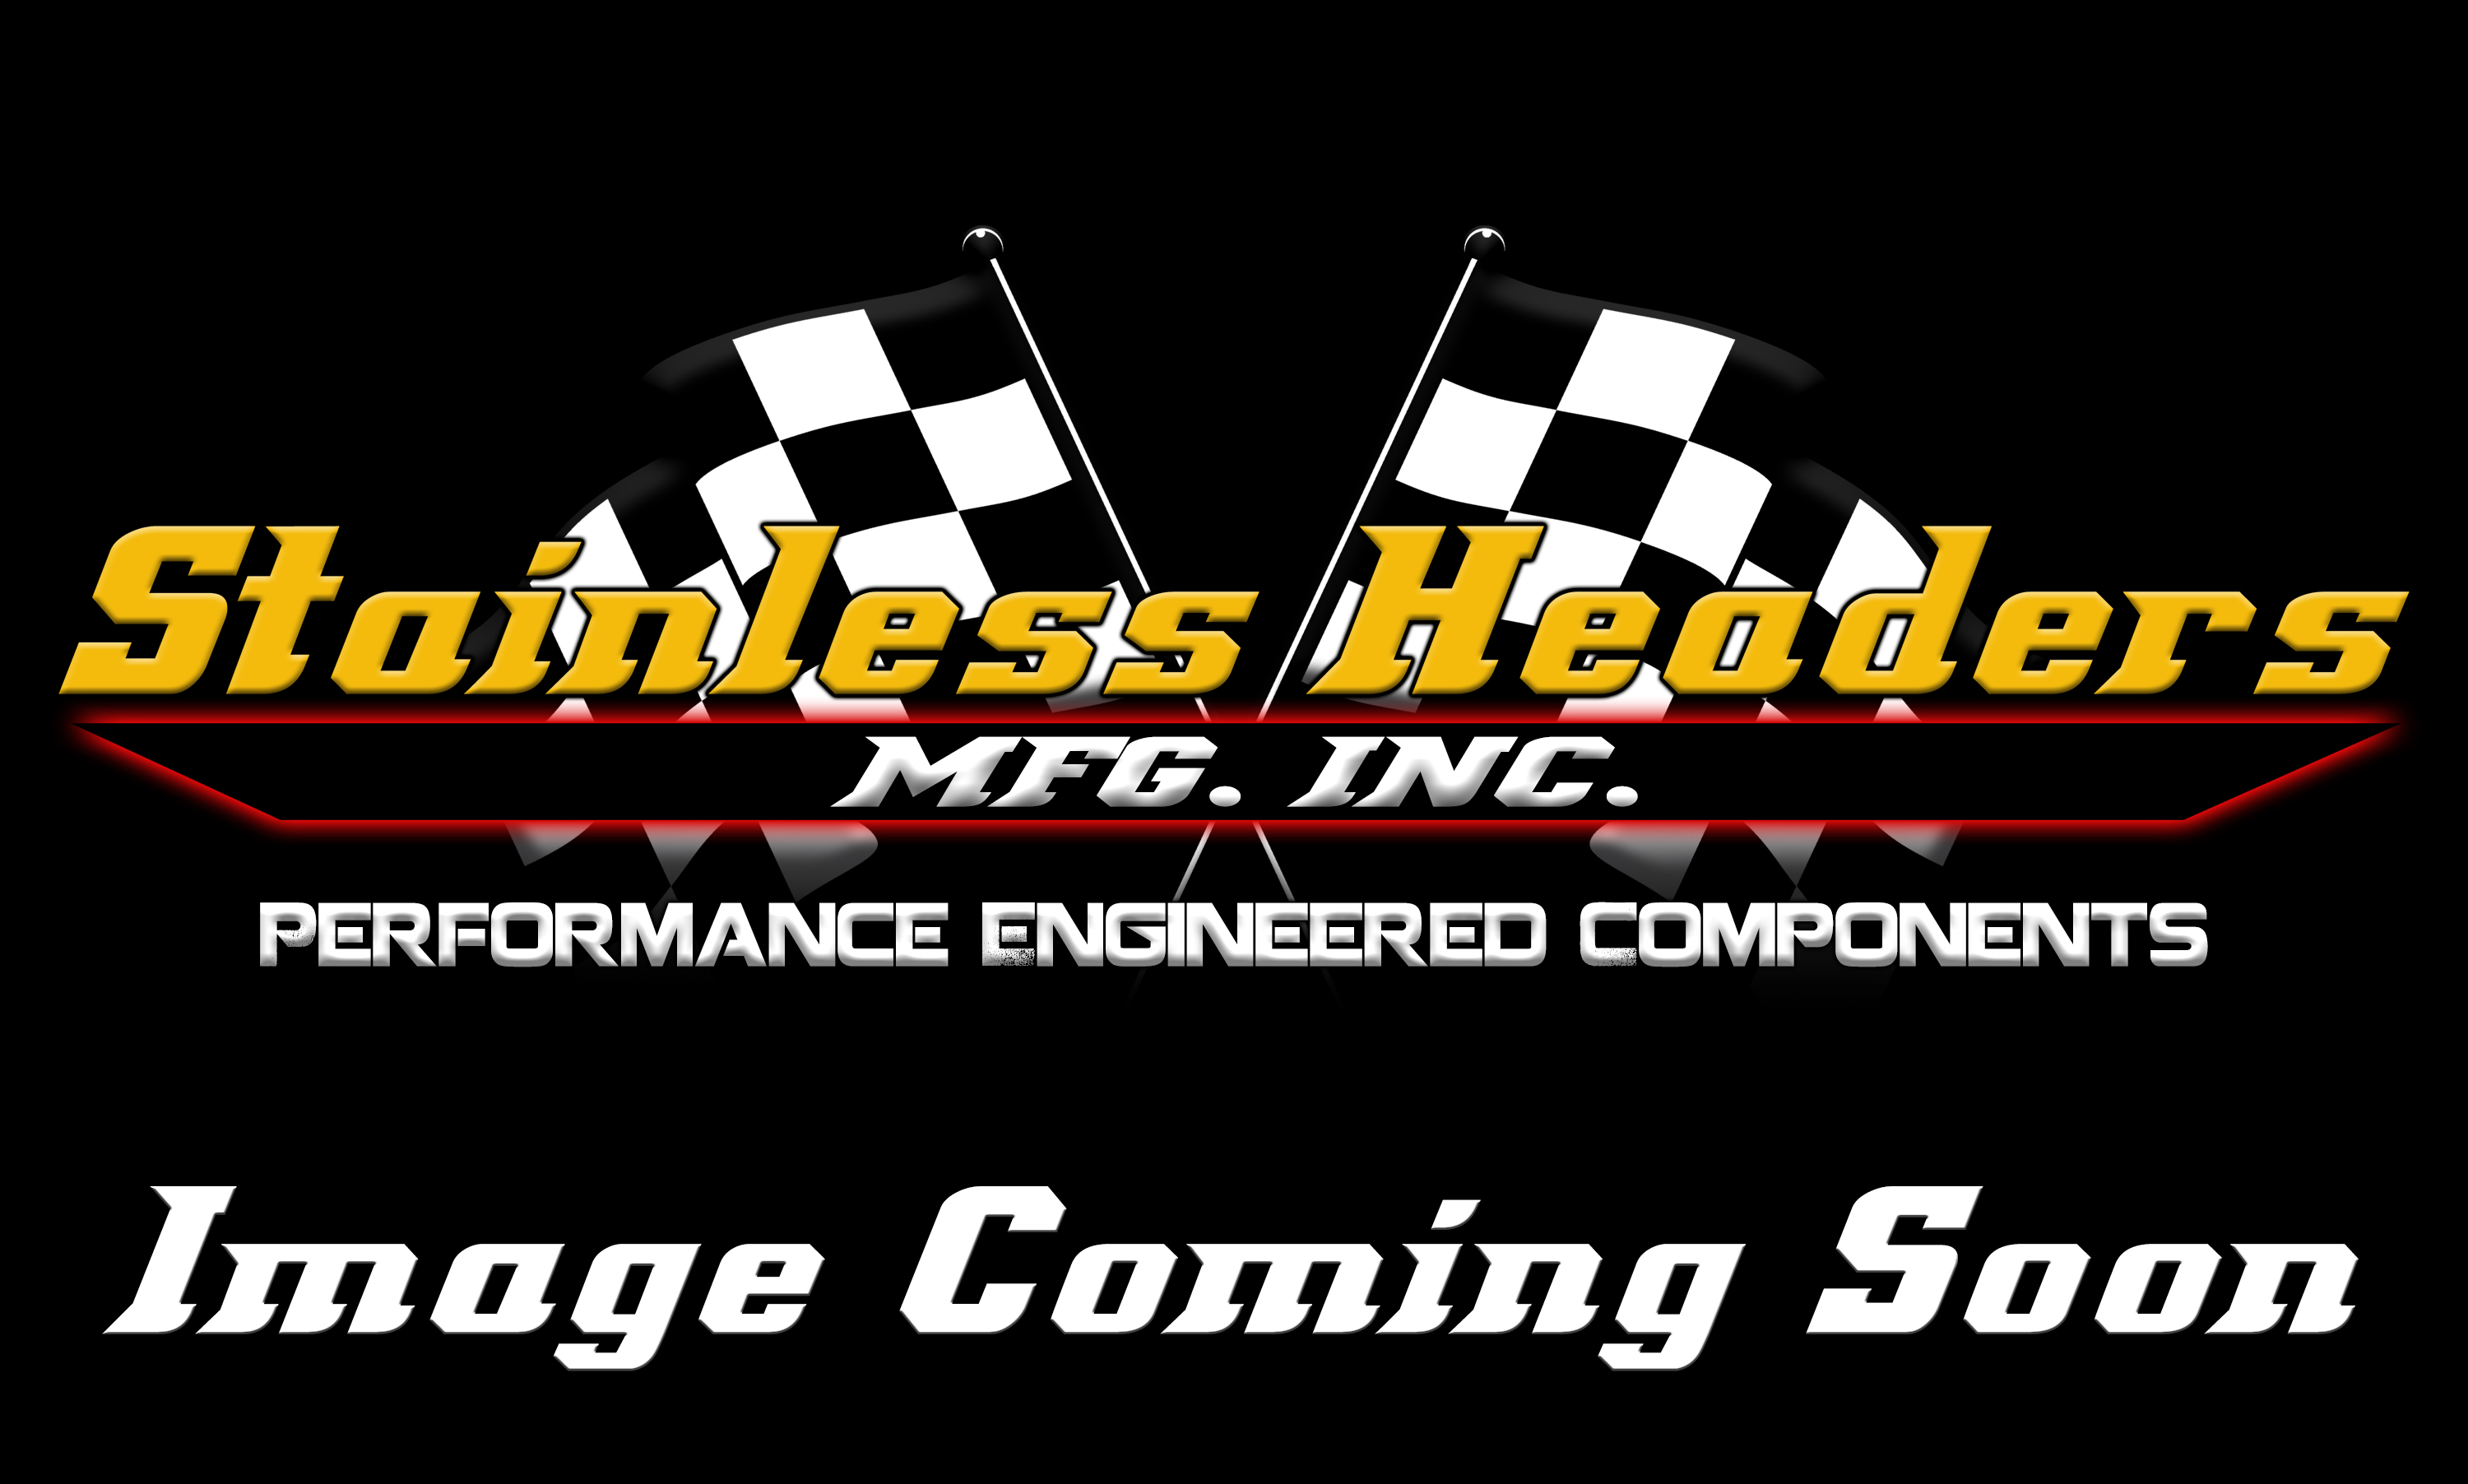 Merge Collectors - 321 Stainless Steel Merge Collectors - Stainless Headers - 2 1/2" Primary 2 into 1 Performance Merge Collector-16ga 321ss